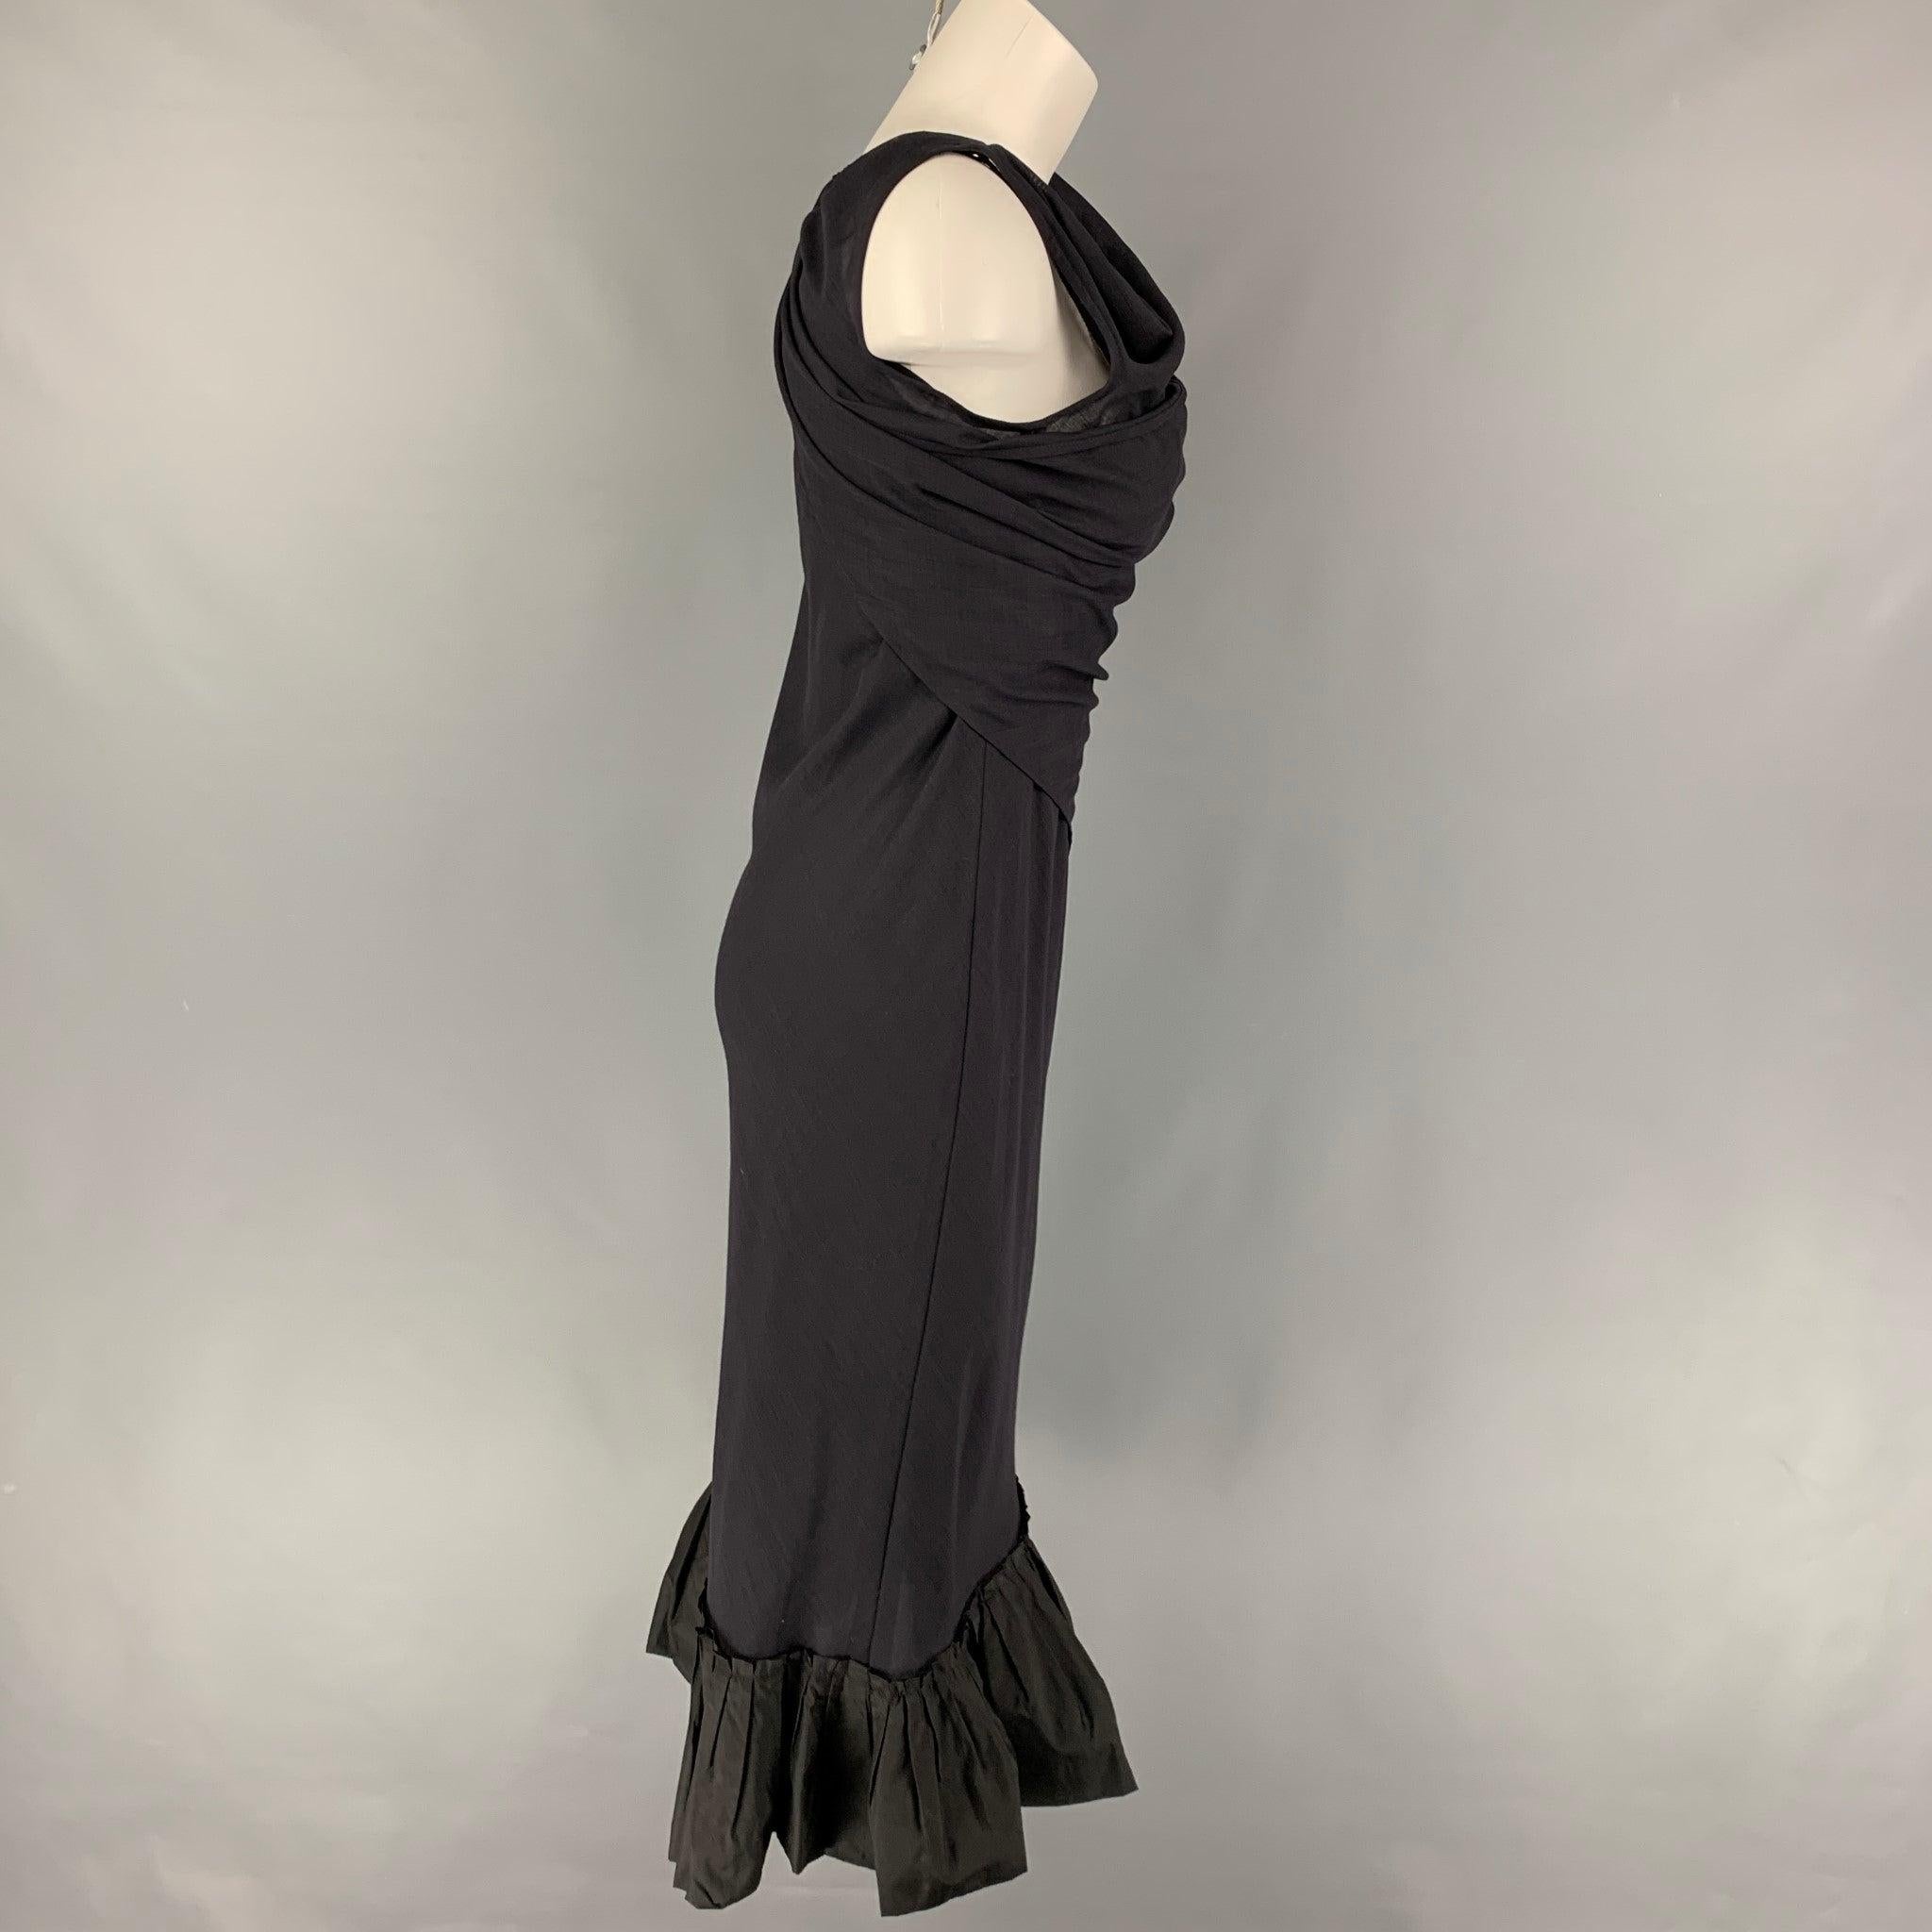 VERA WANG dress comes in a navy wool featuring a wrap around panel, ruffled trim, sleeveless, and a back zip up closure.
Very Good
Pre-Owned Condition. 

Marked:   4 

Measurements: 
 
Shoulder:Bust: 28 inches  Waist:
26 inches  Hip: 33 inches 